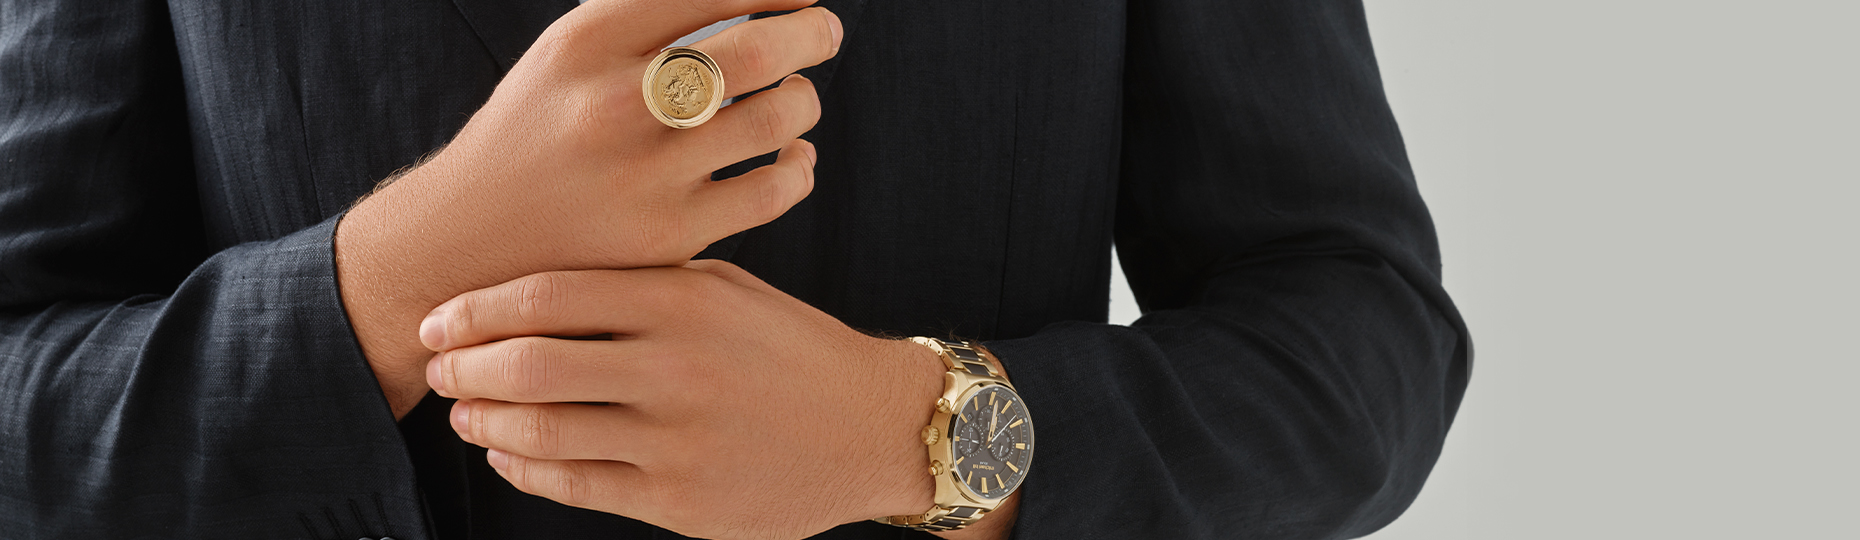 man wearing large gold coin sovereign ring and gold watch